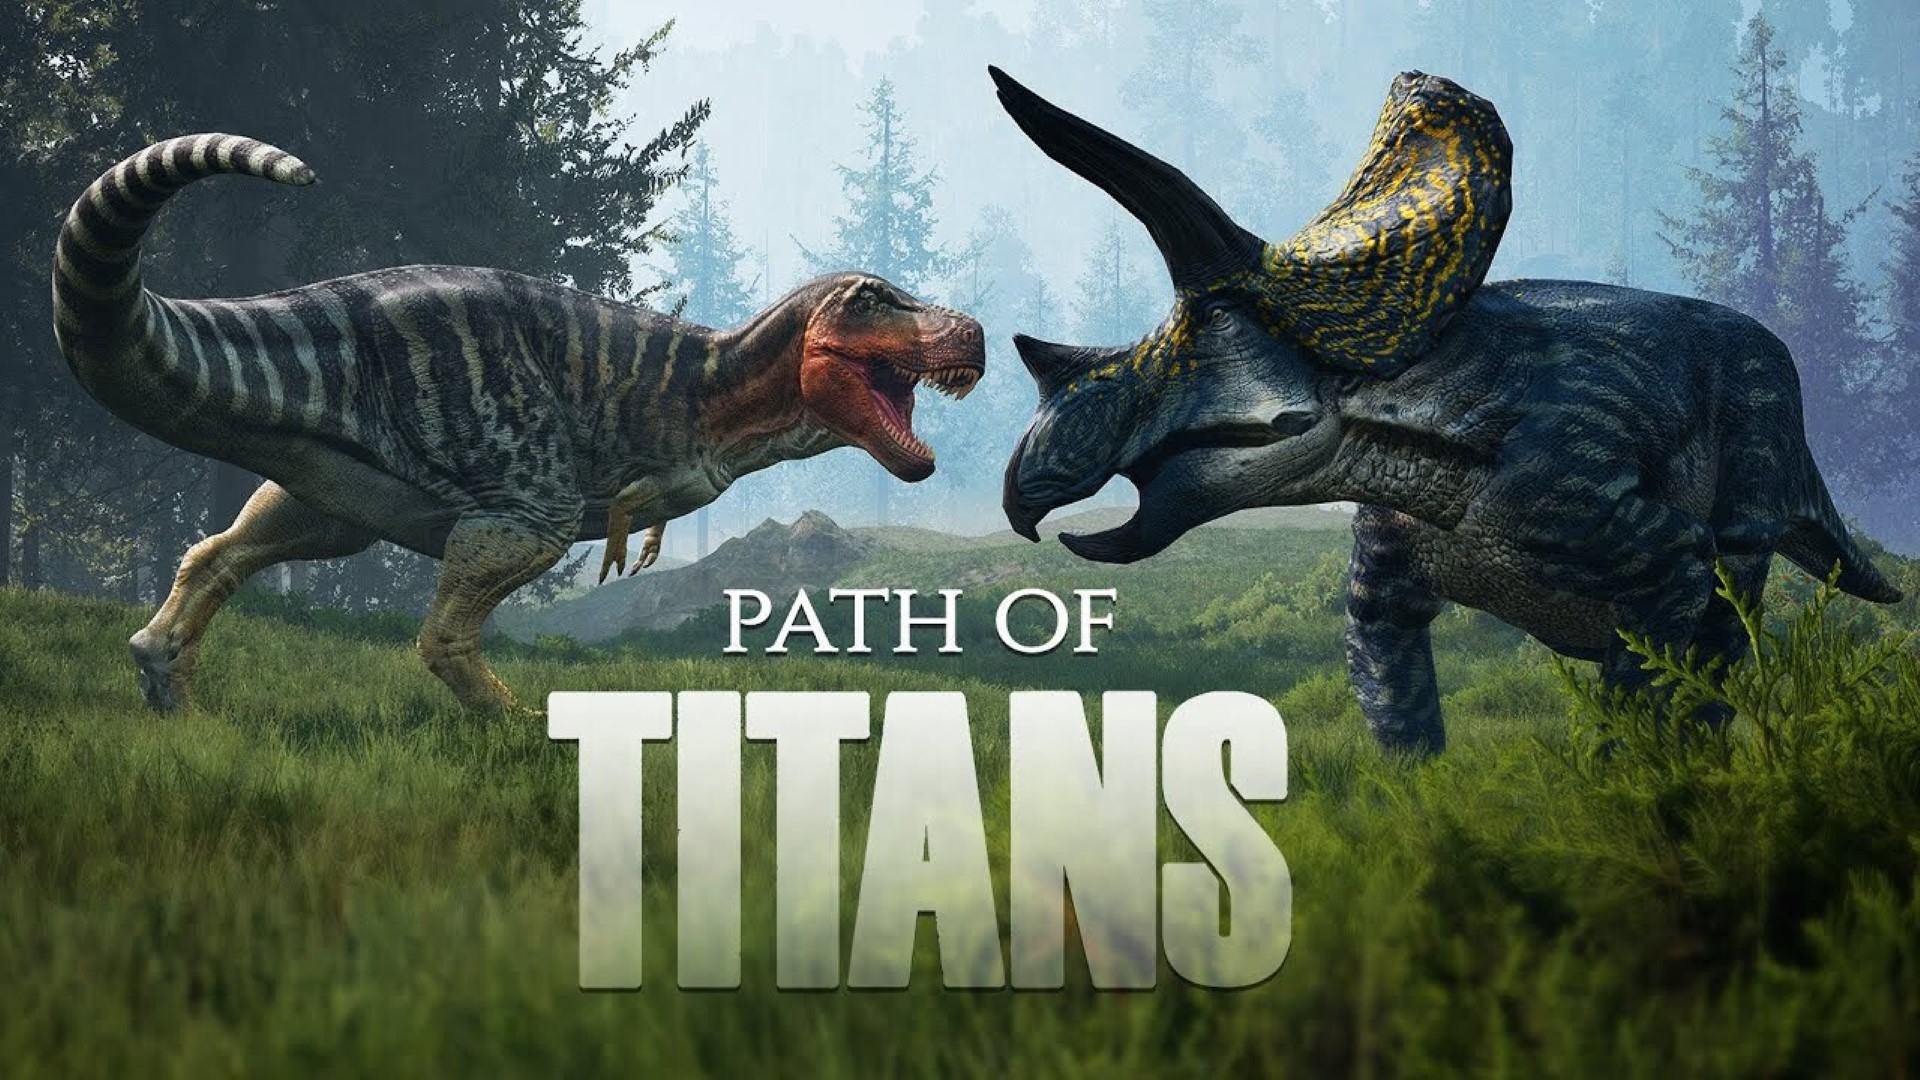 Path of Titans: The new dinosaur MMO that is now available on Xbox